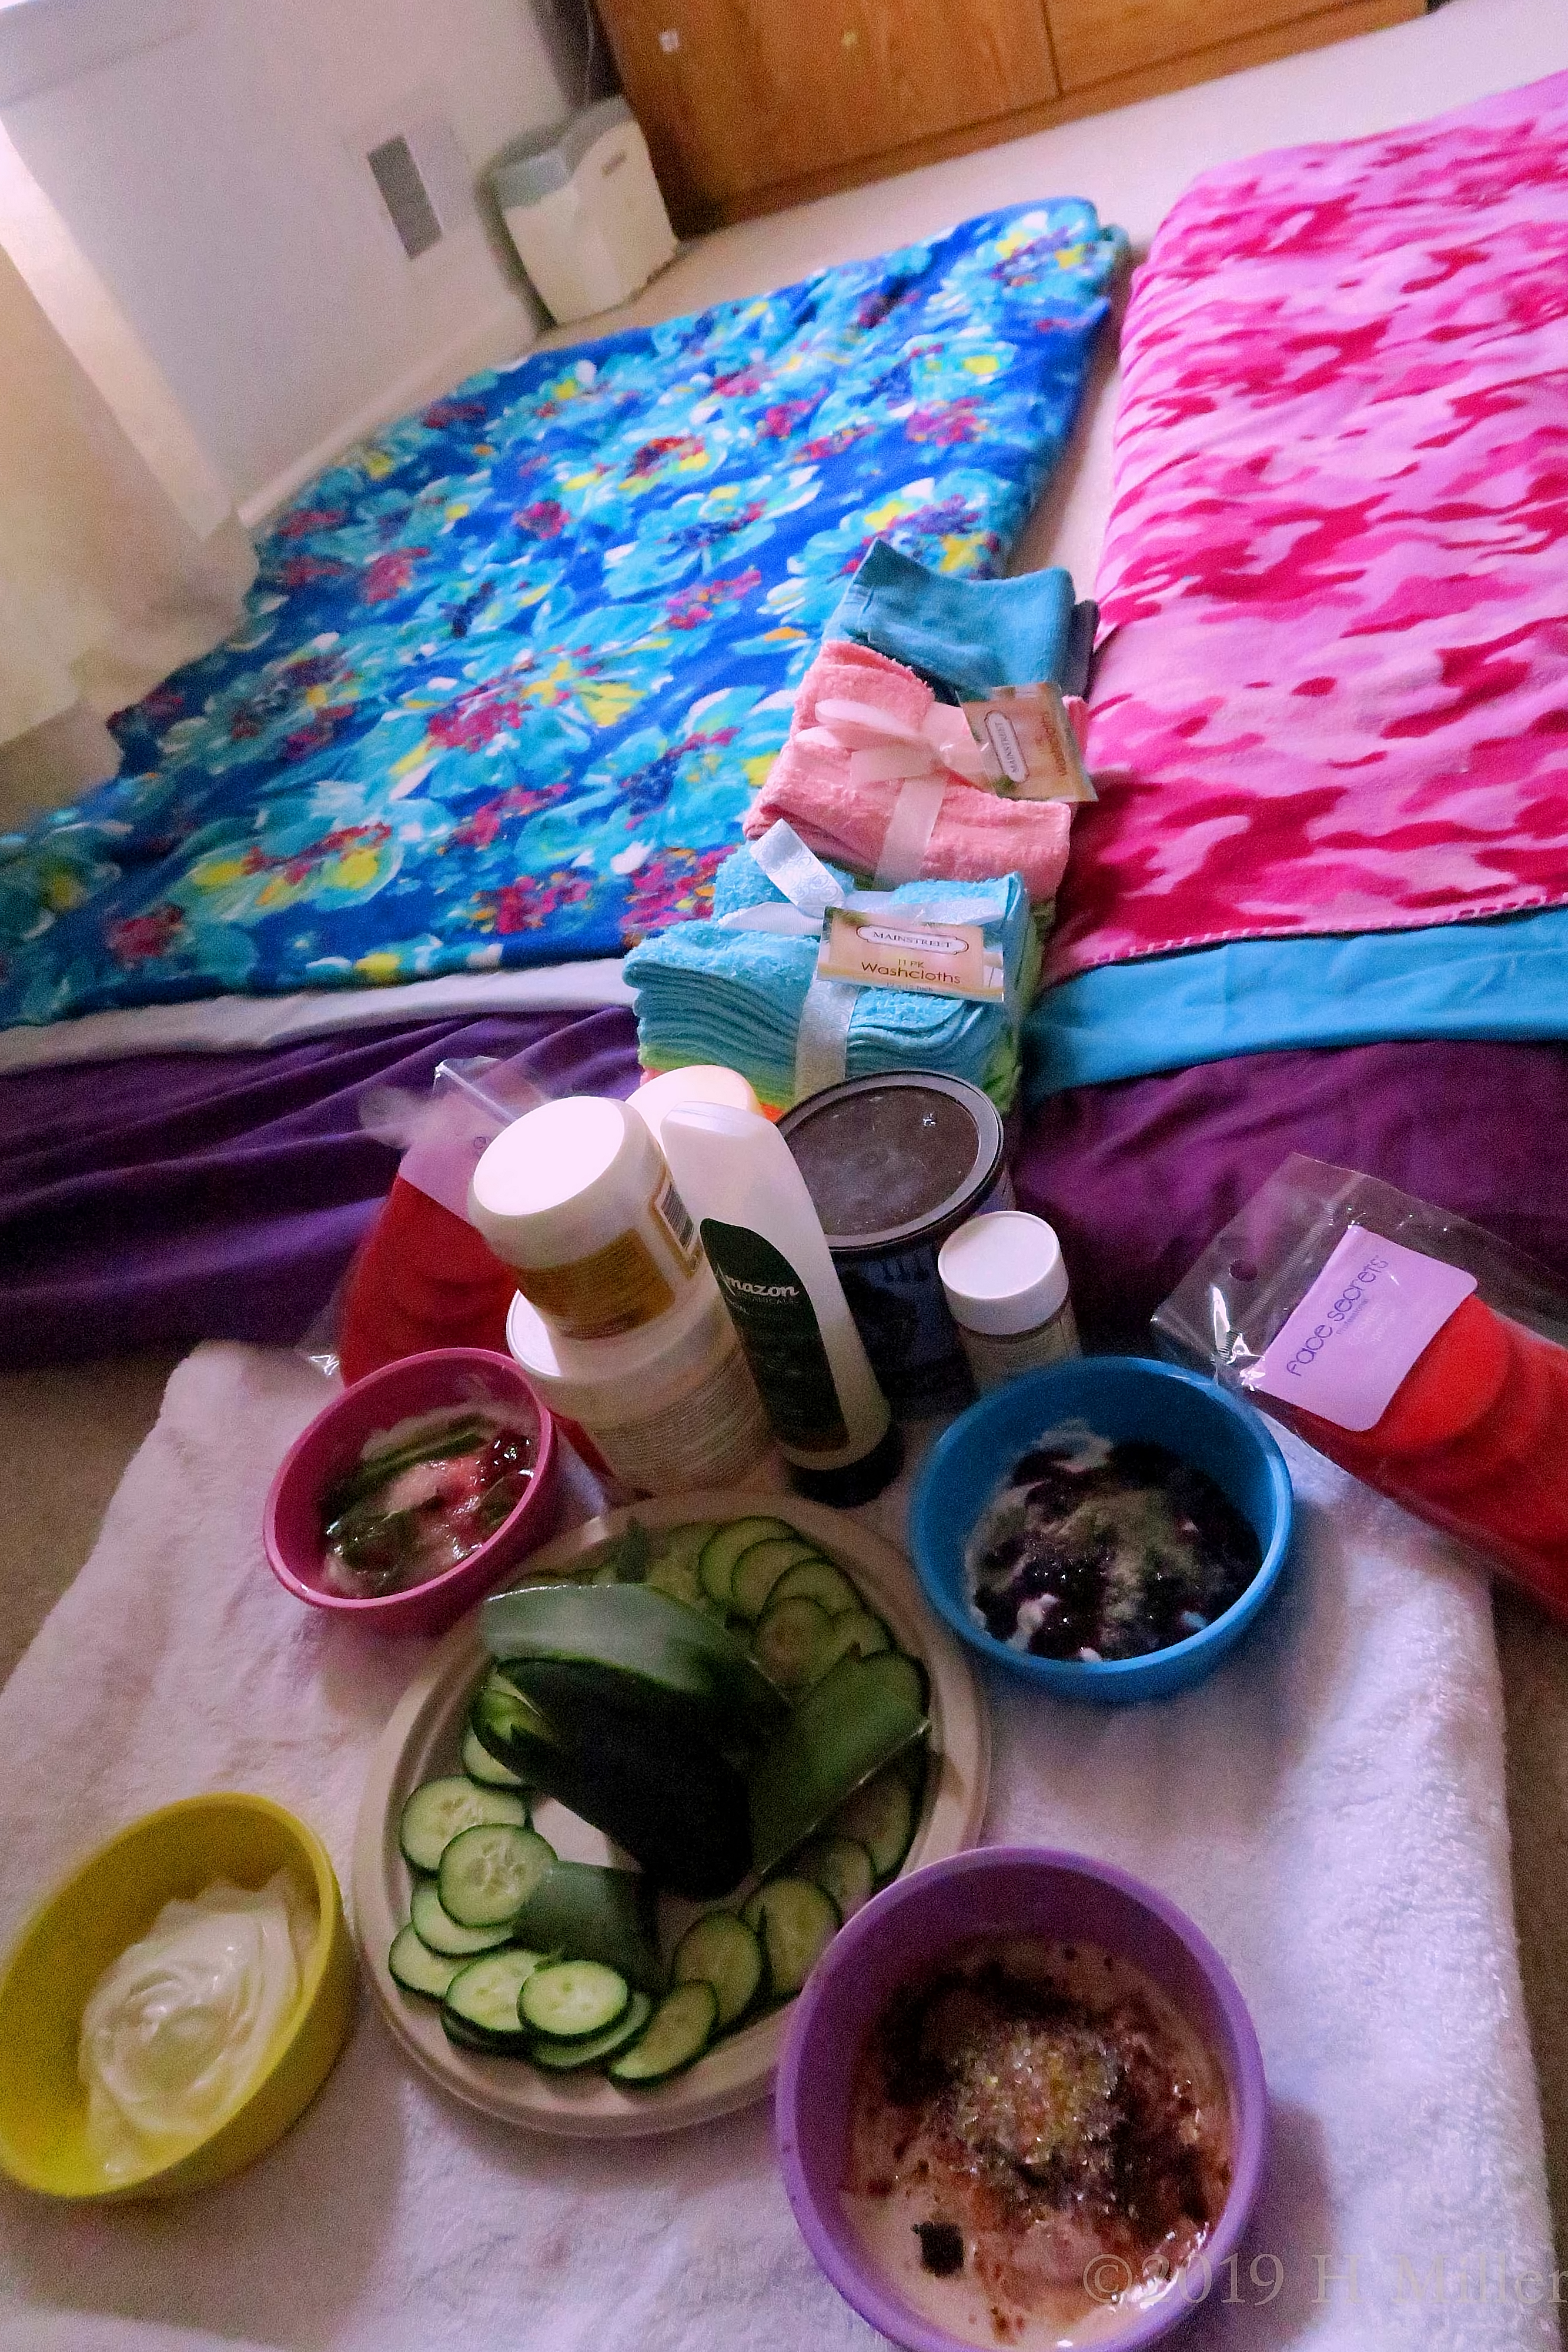 The Spa Room Is Decorated And Ready. Cukes, Aloe, Yogurt, Facial Masques, Facial Towels, And Mats All Are Ready 